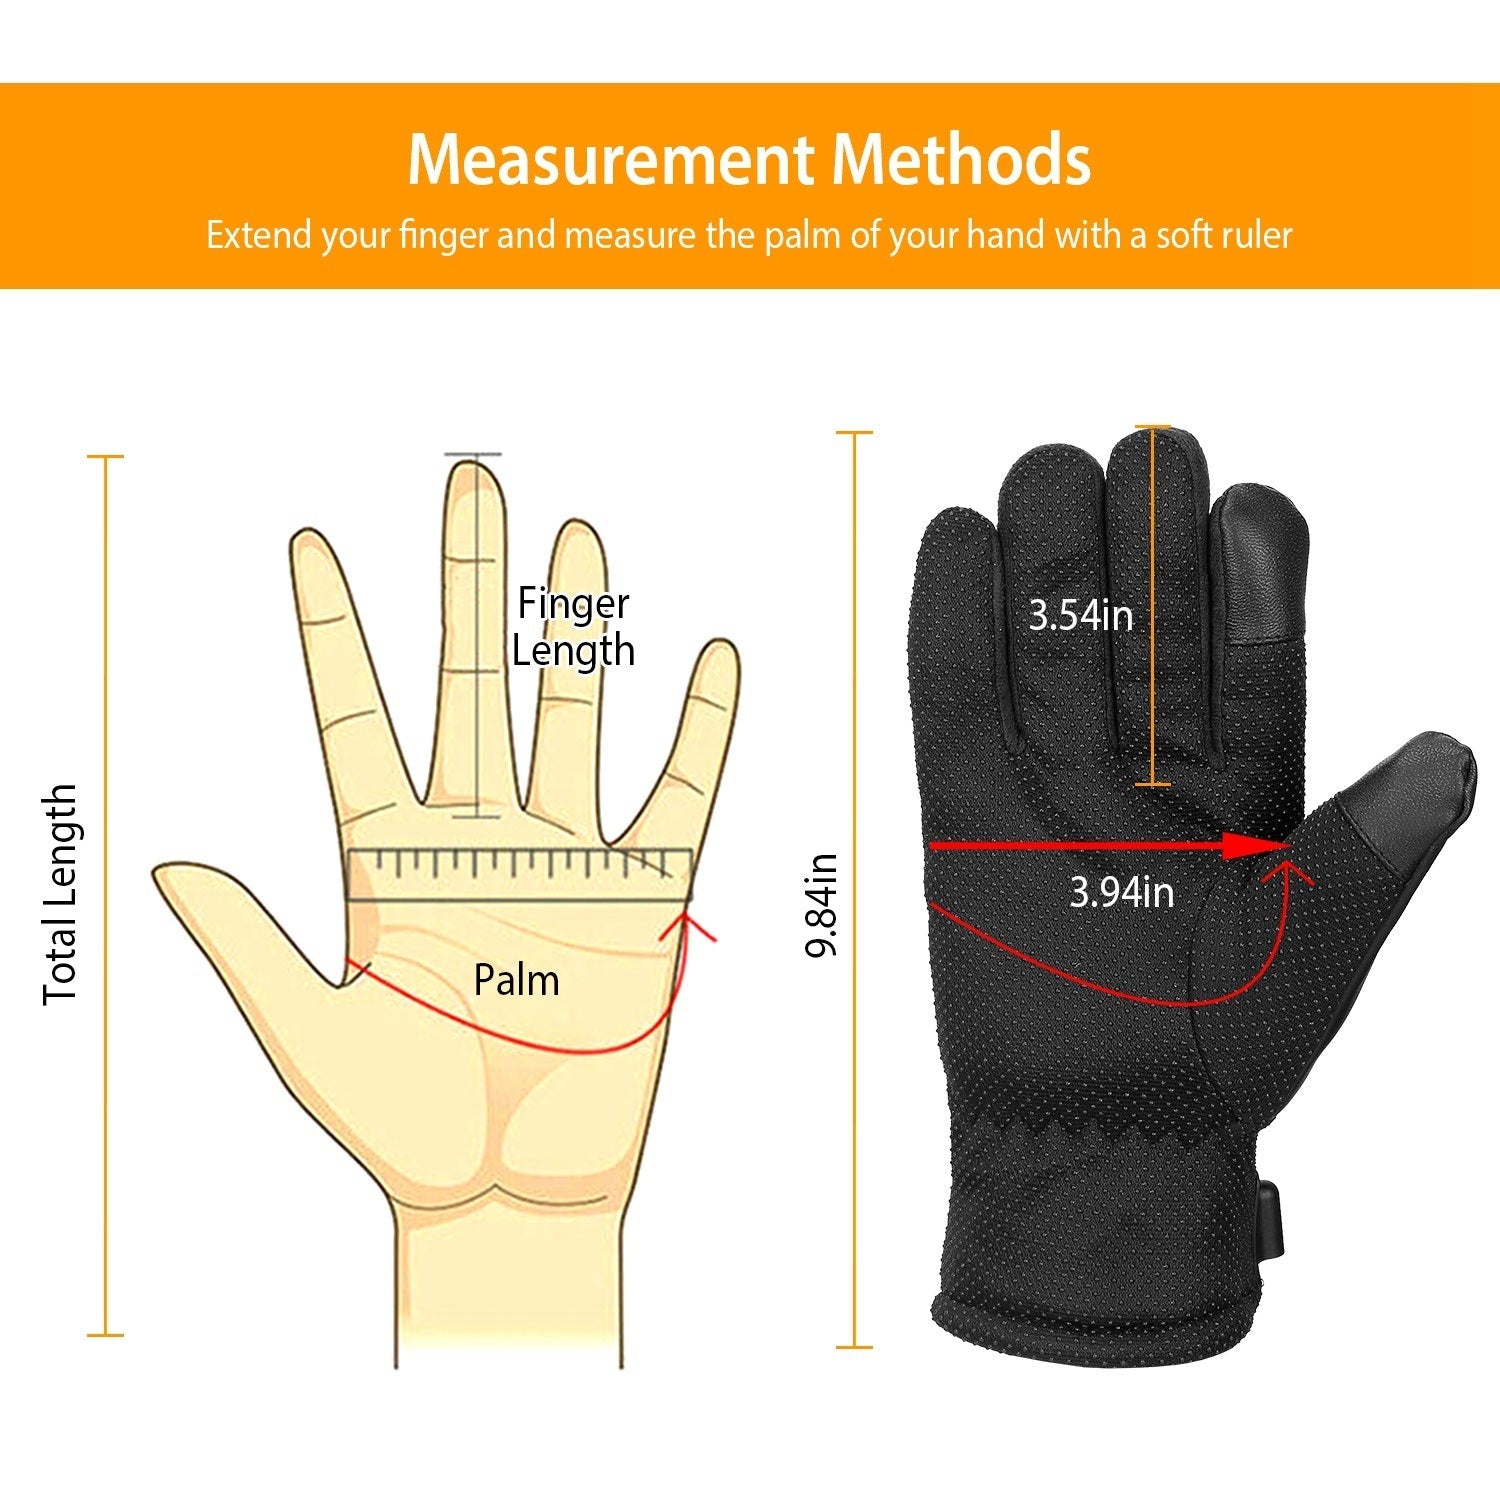 
  
  Electric Heated Gloves USB Plug Touchscreen Thermal Gloves Leather
  
